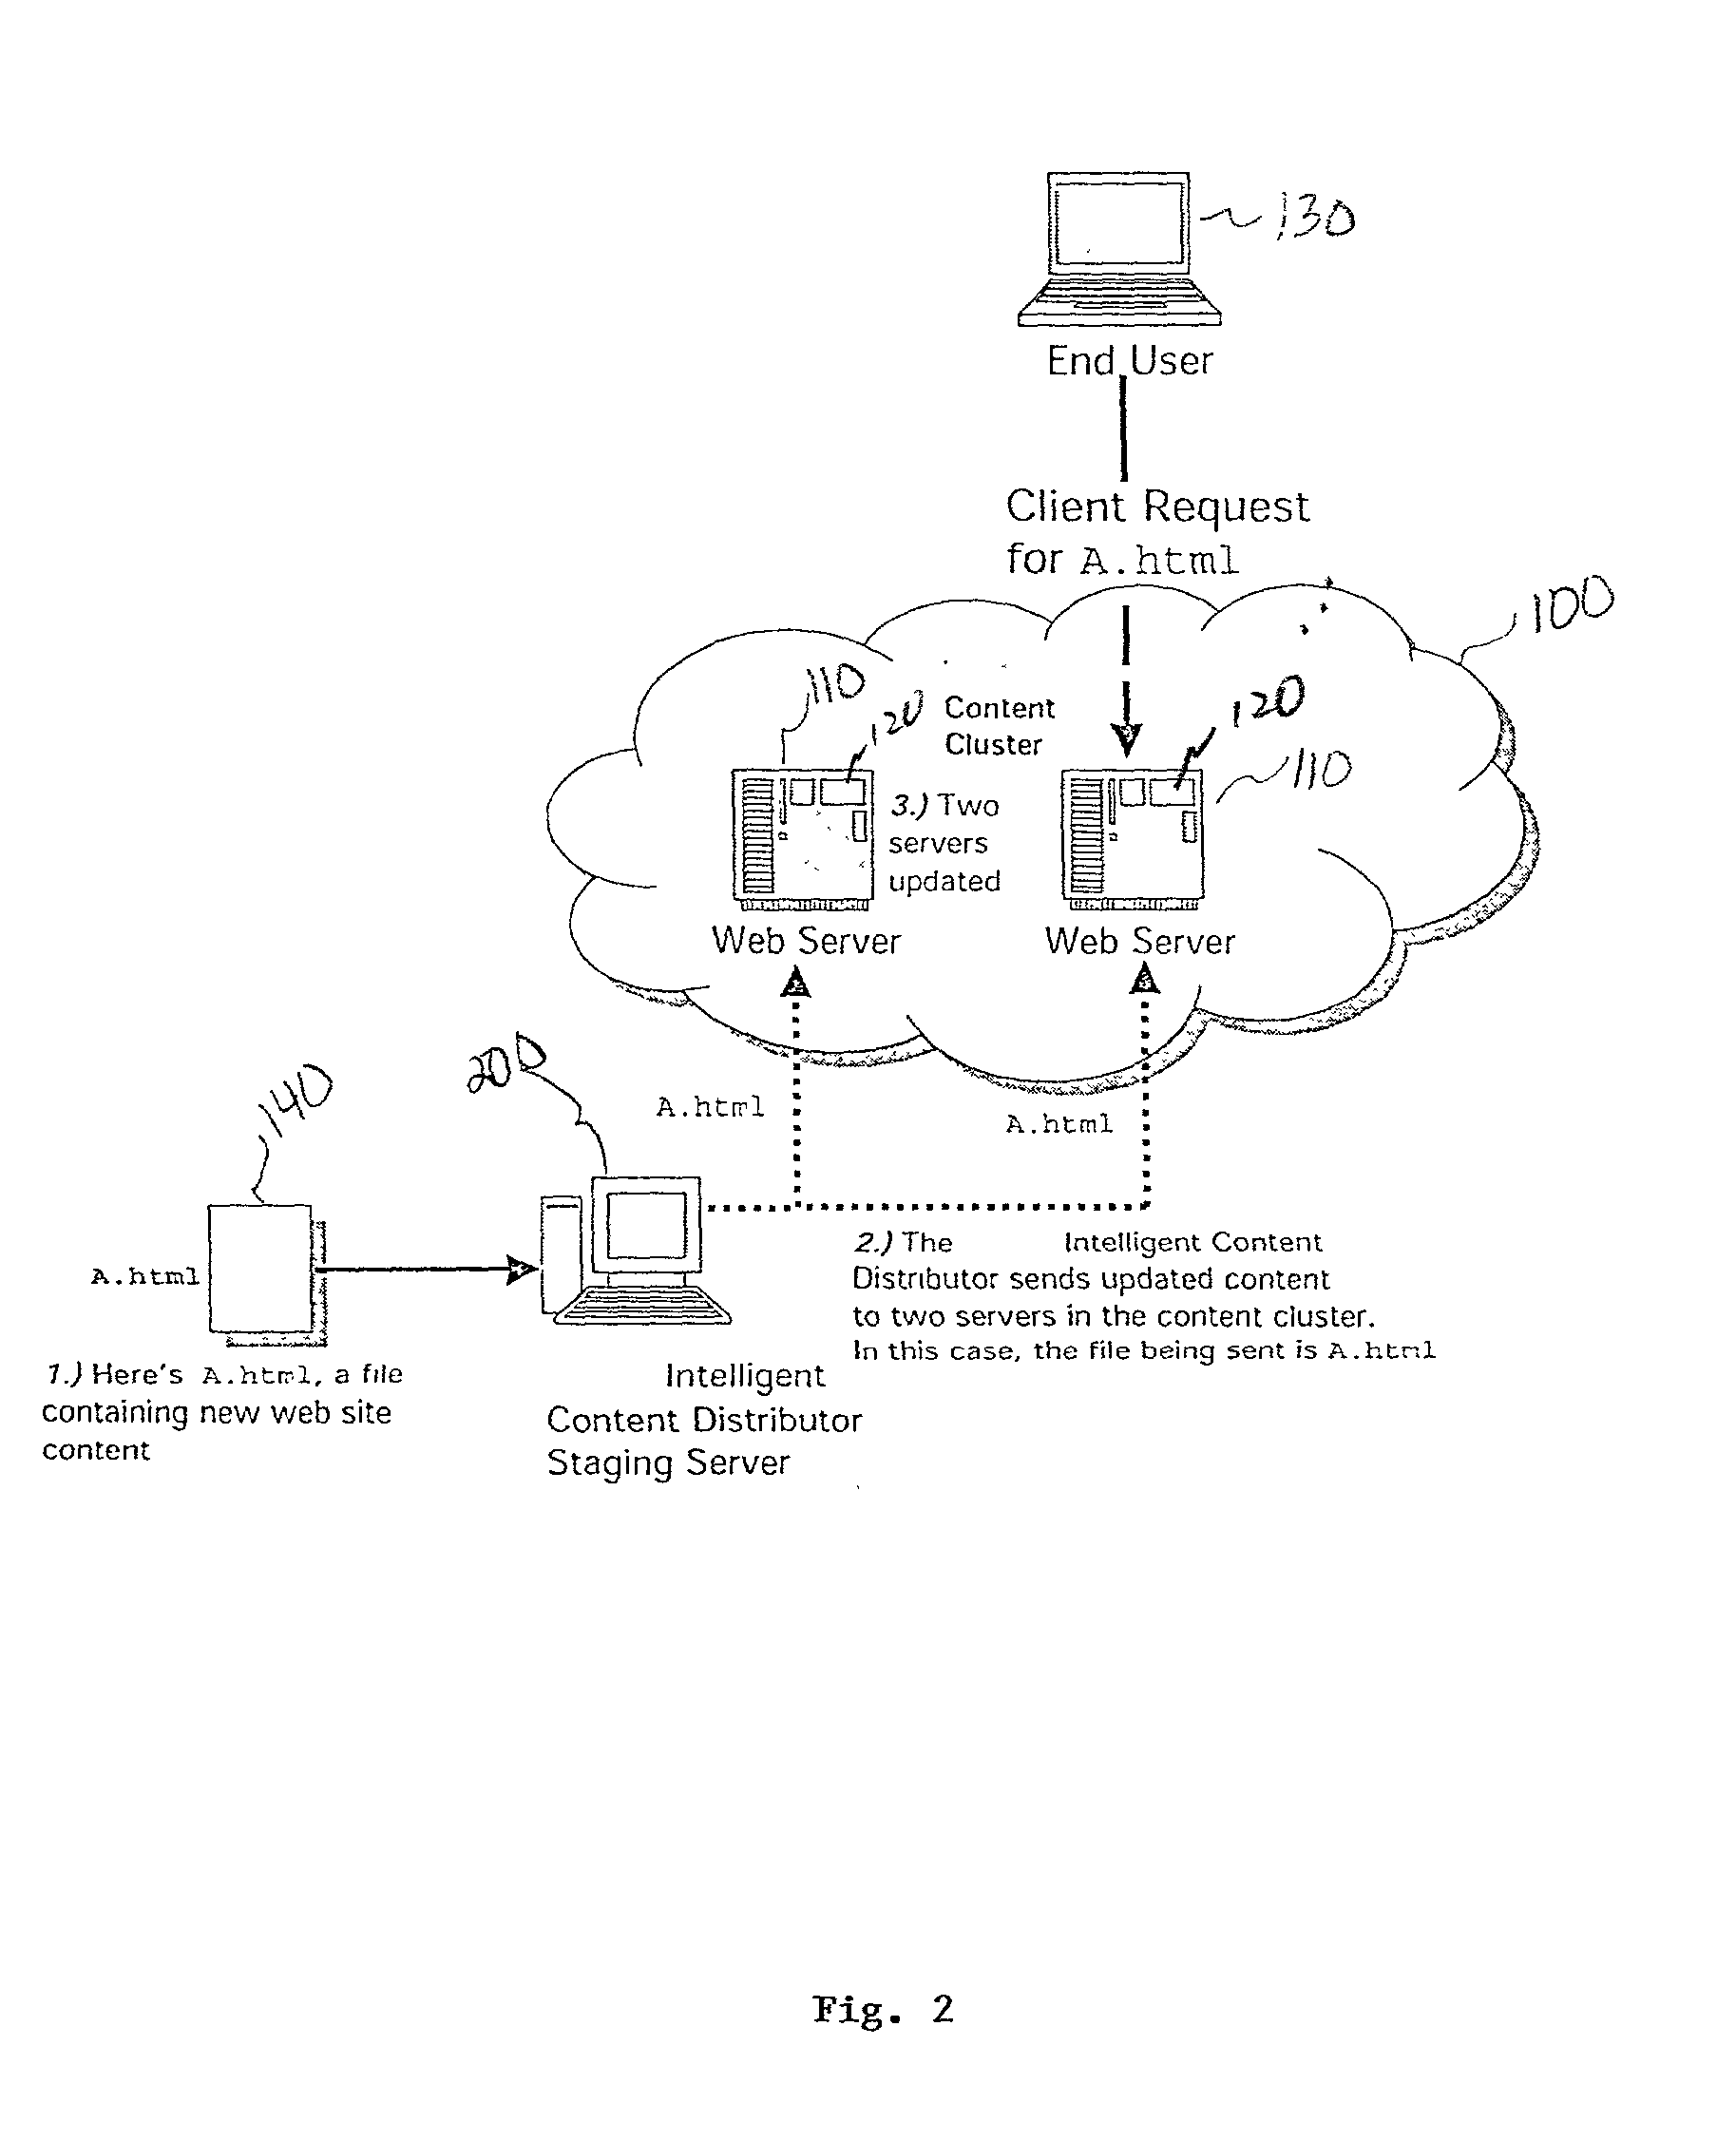 System and method for intelligently distributing content over a communicatons network